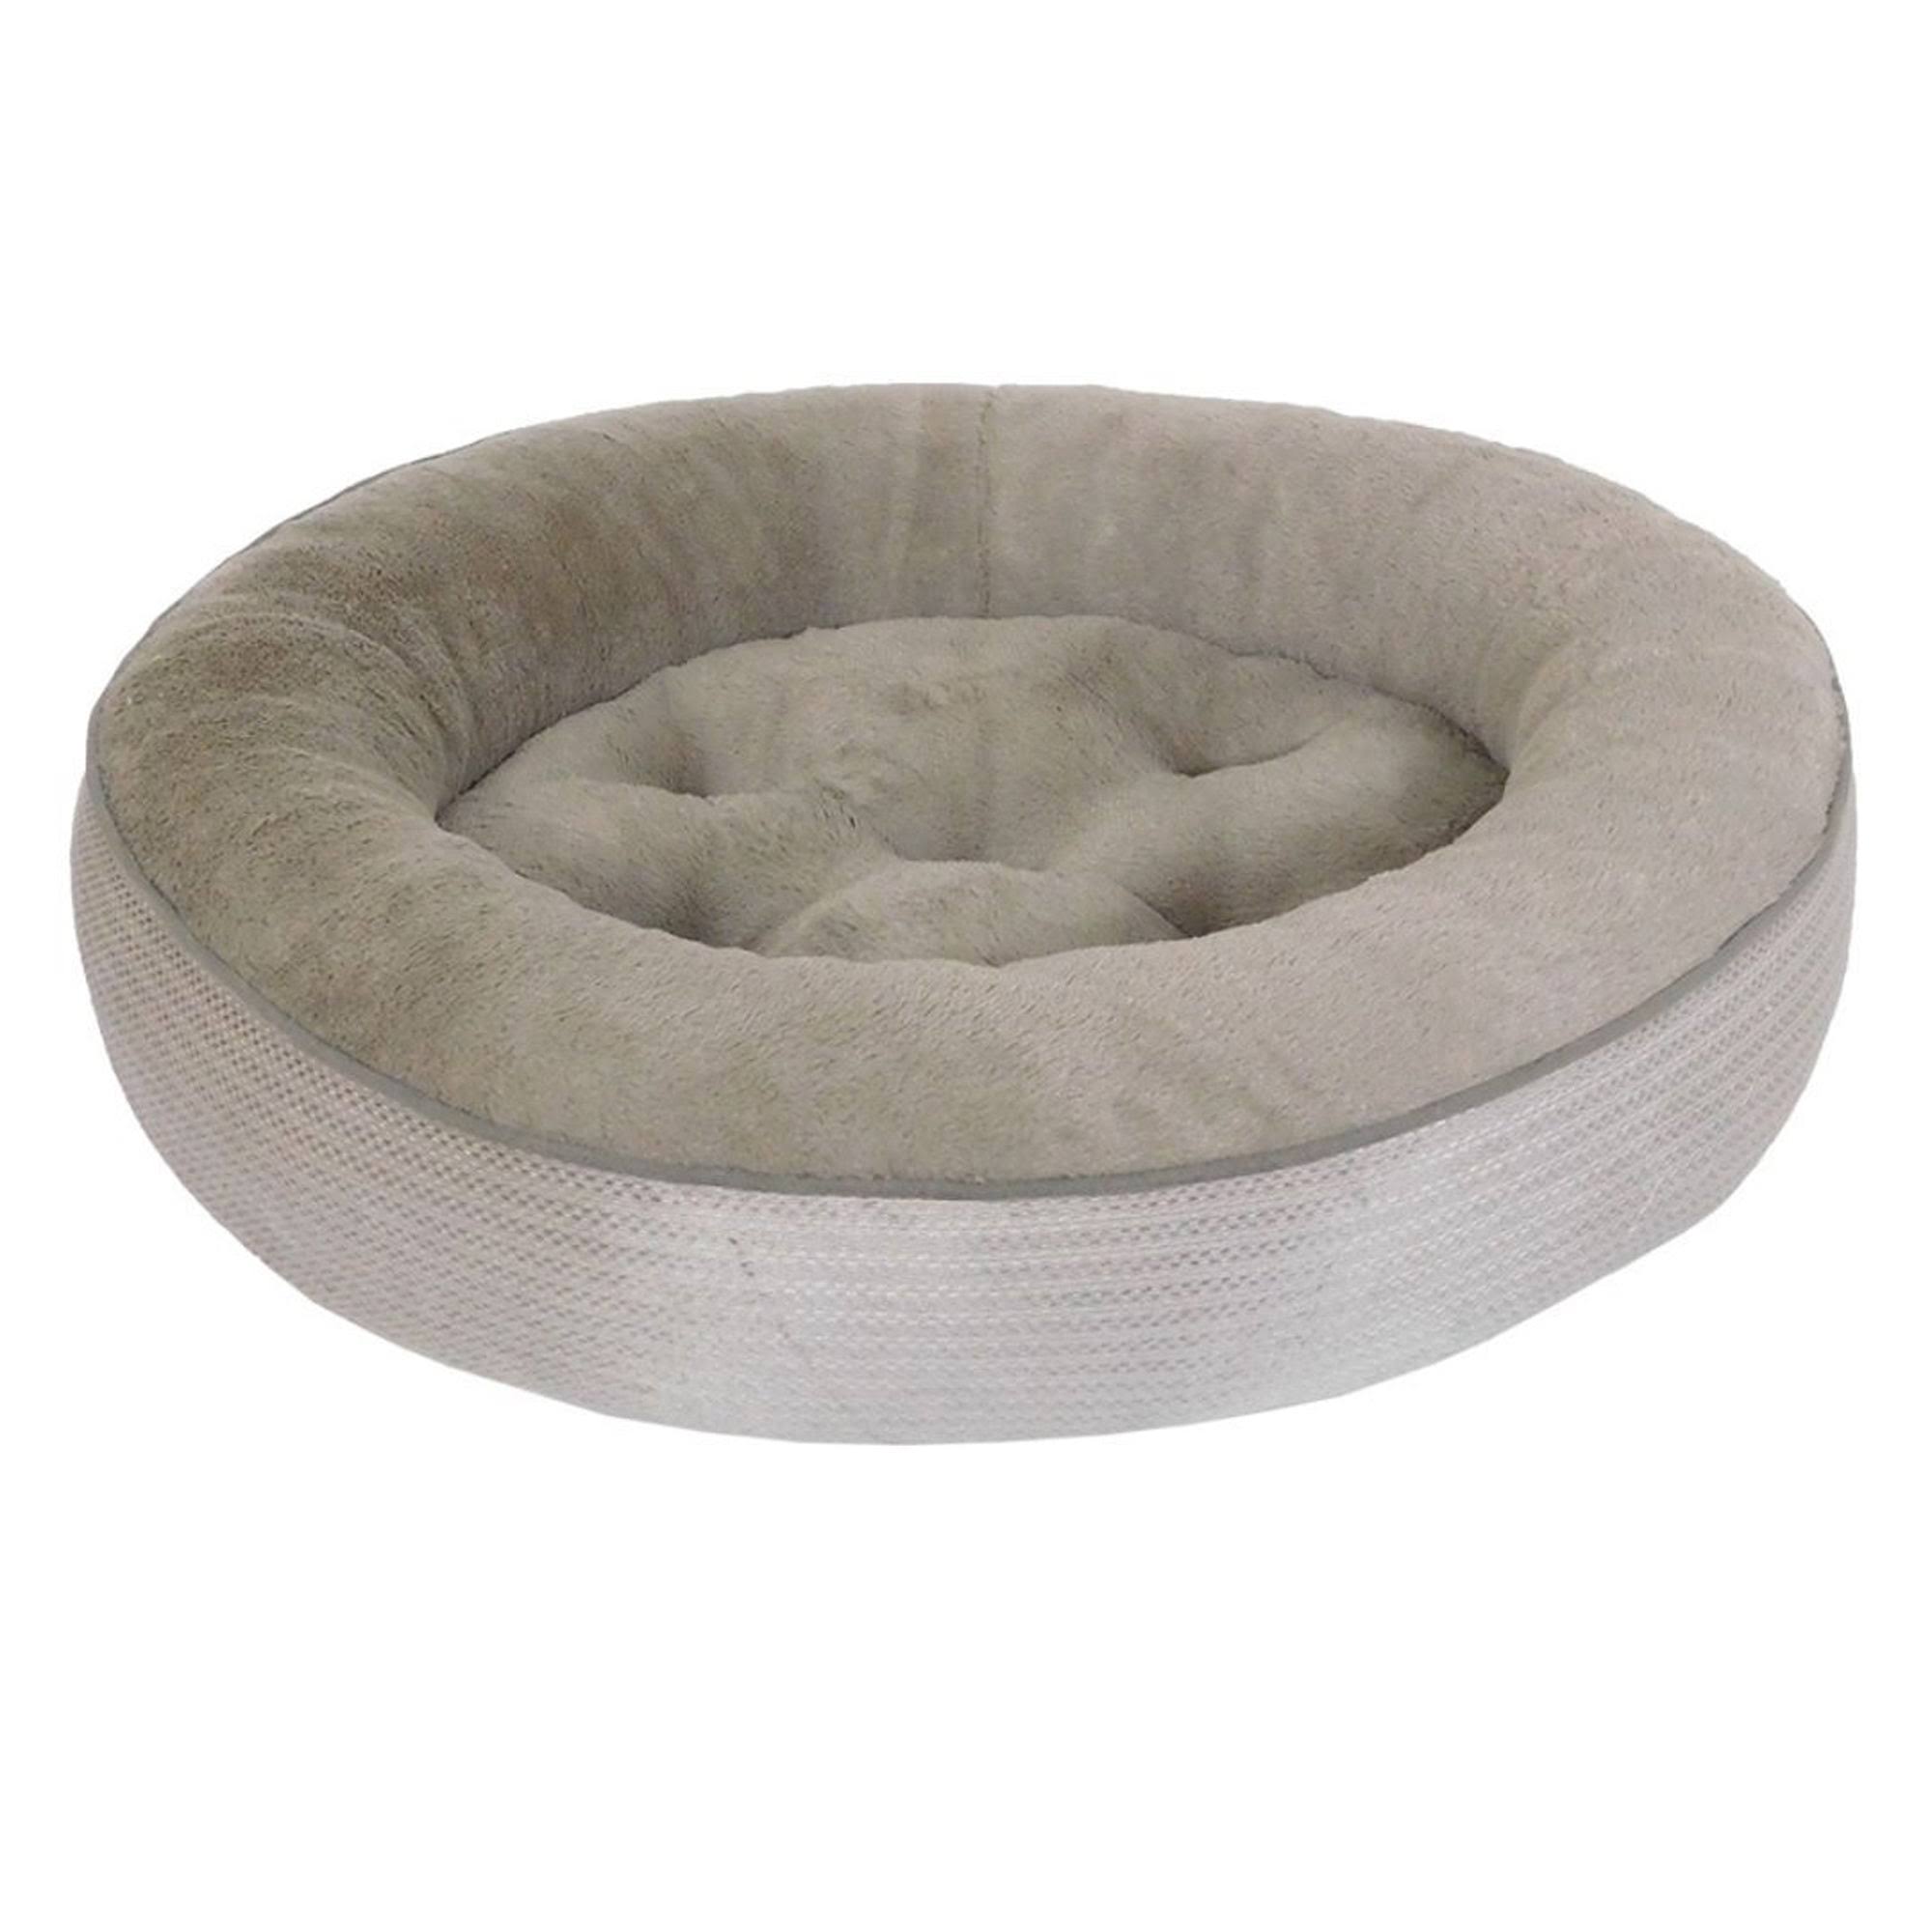 Arlee Pet Products Duncan Dunkin Dog Bed Gravel Grey 36X27X7 inch